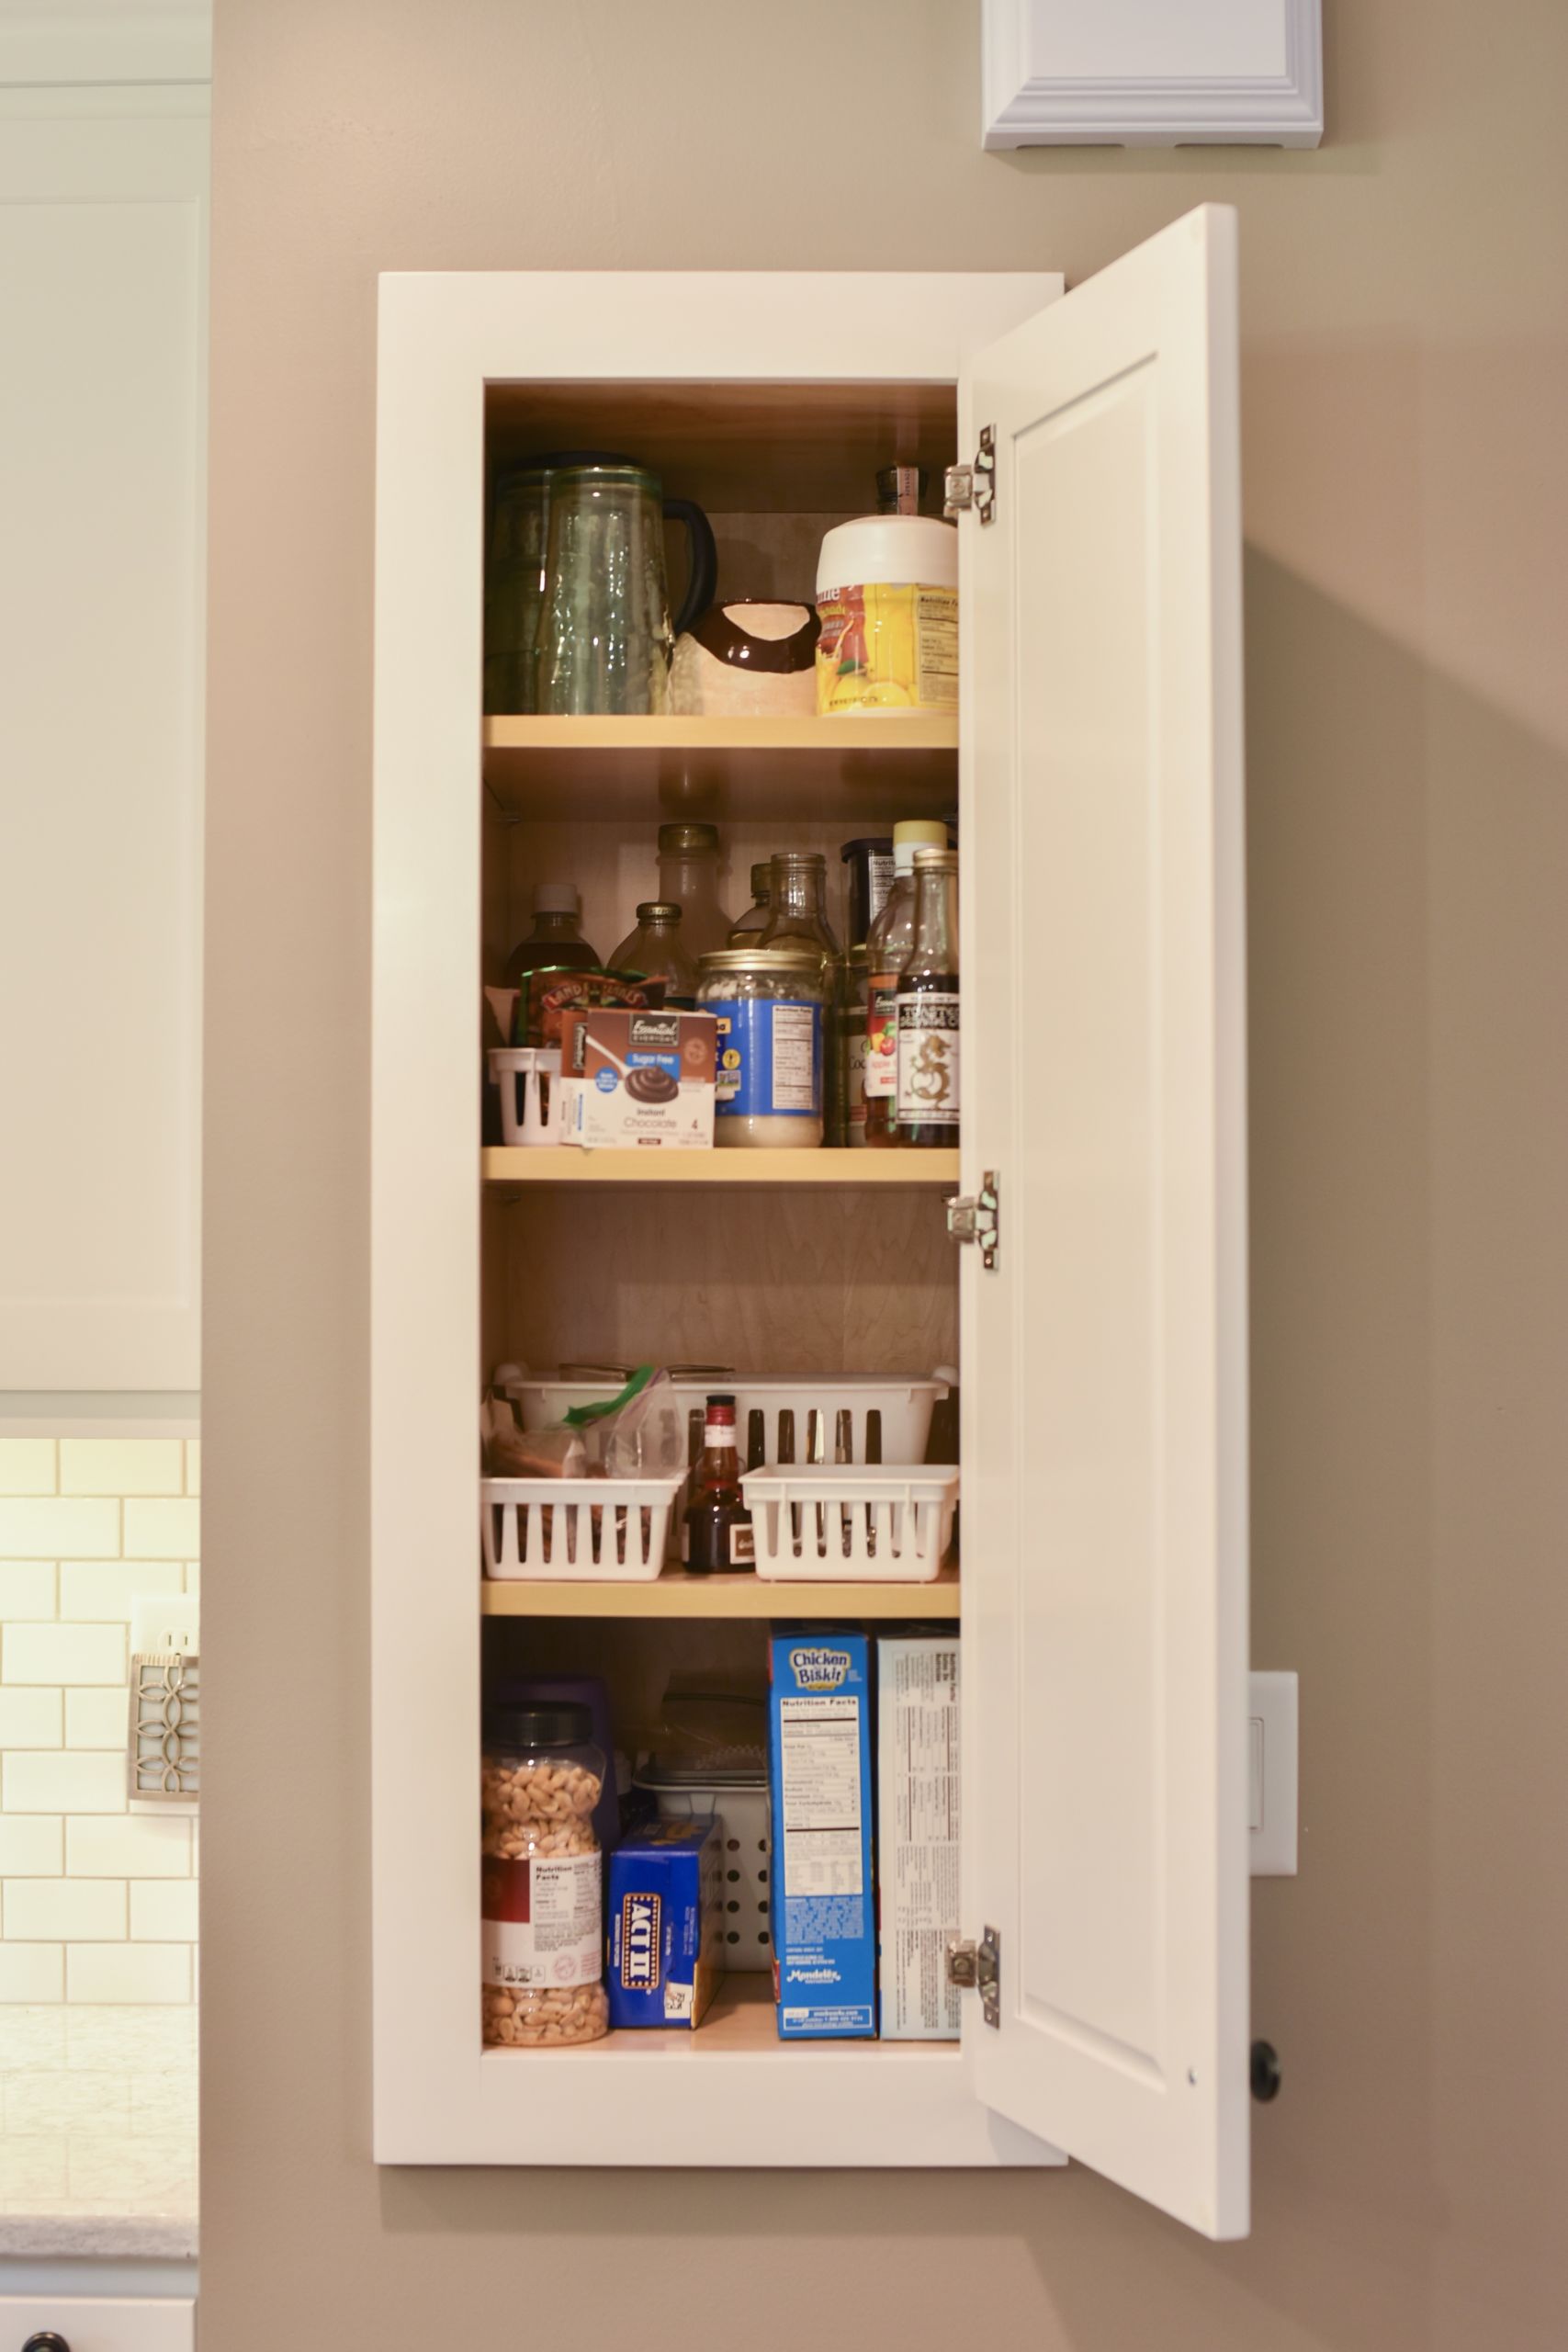 Optimizing Small Kitchen Spaces With, Small Cabinet For Pantry